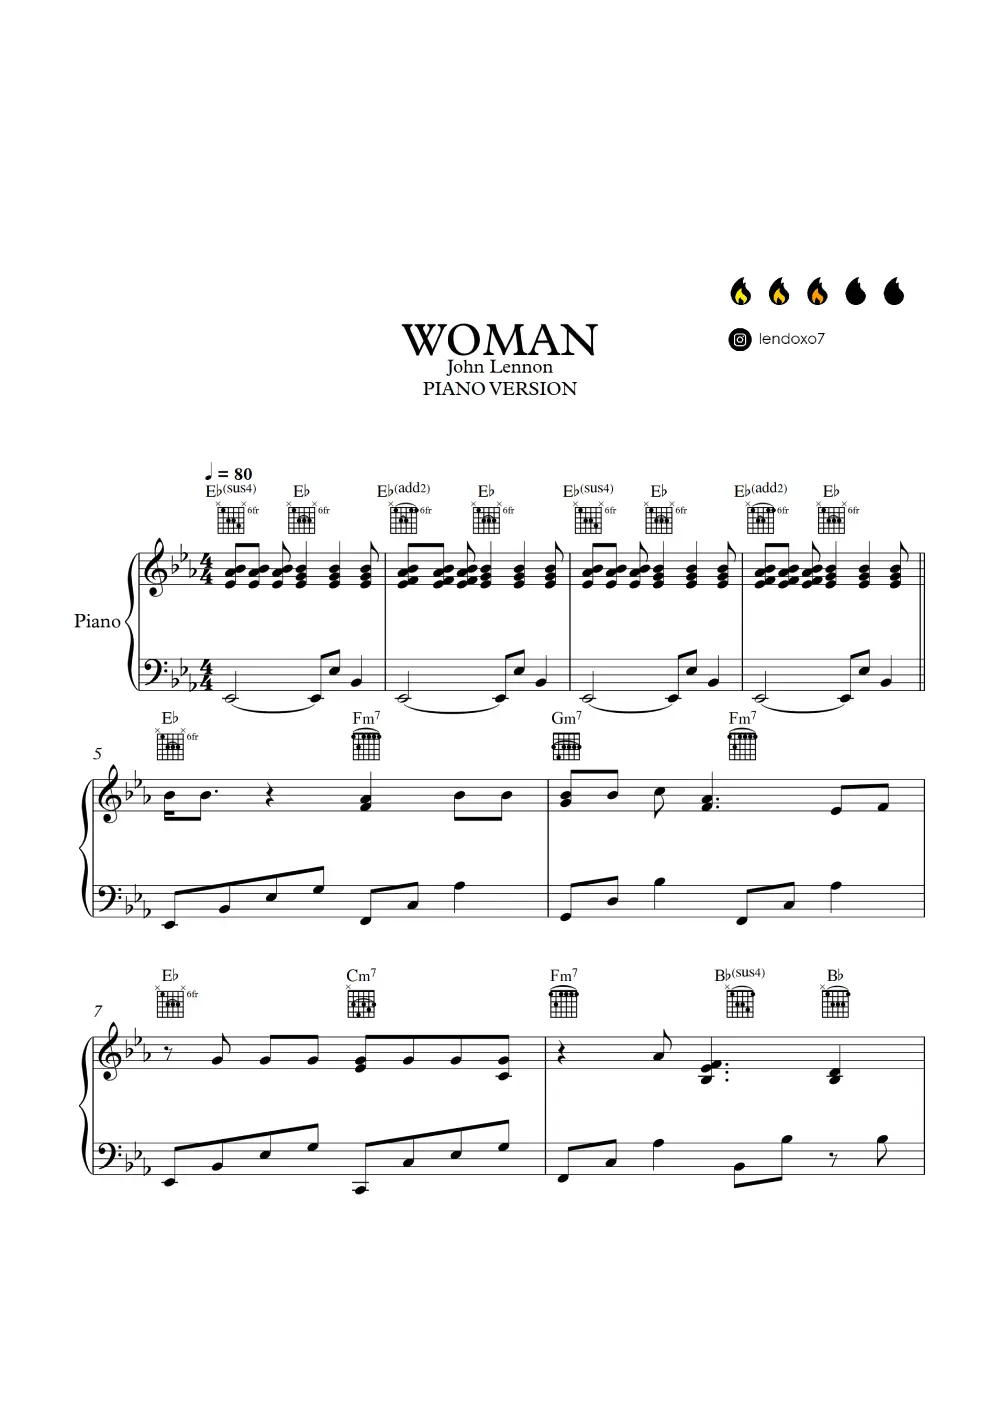 Woman" Sheet Music by John Lennon for Piano/Vocal/Chords